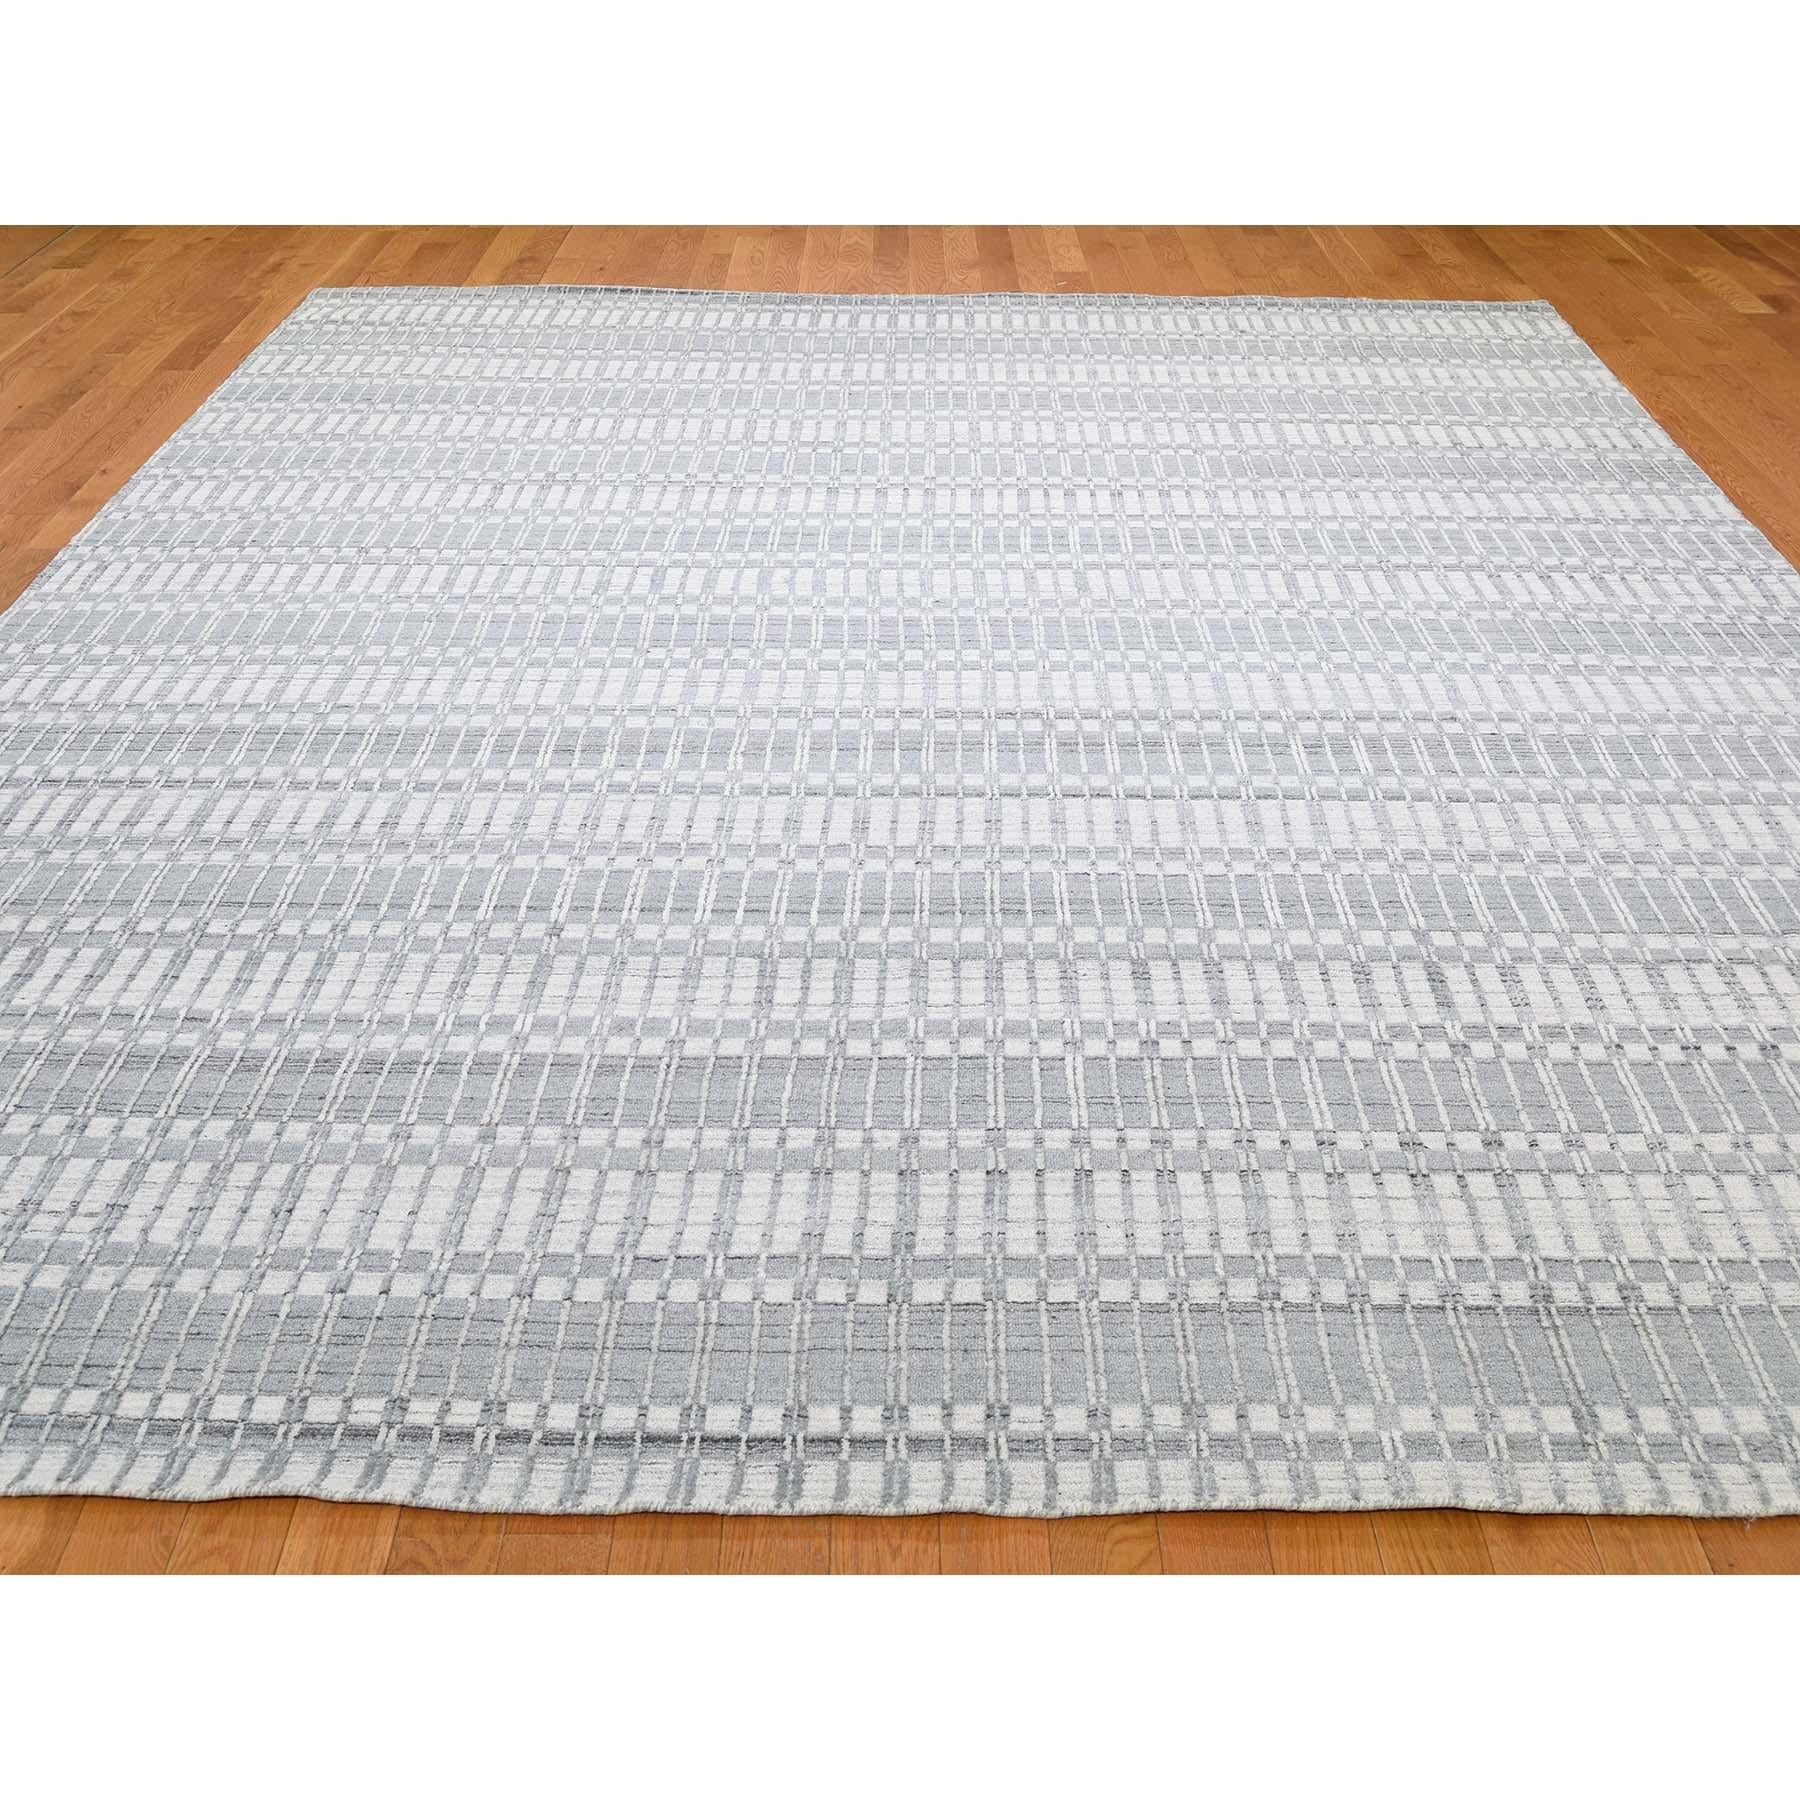 Other Hi Lo Pile Pure Wool Tone On Tone Hand-Loomed Oriental Rug